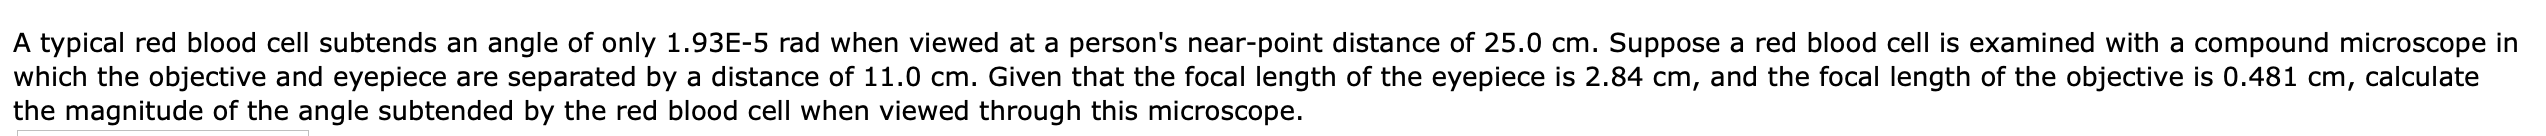 A typical red blood cell subtends an angle of only 1.93E-5 rad when viewed at a person's near-point distance of 25.0 cm. Suppose a red blood cell is examined with a compound microscope in
which the objective and eyepiece are separated by a distance of 11.0 cm. Given that the focal length of the eyepiece is 2.84 cm, and the focal length of the objective is 0.481 cm,
the magnitude of the angle subtended by the red blood cell when viewed through this microscope.
calculate
